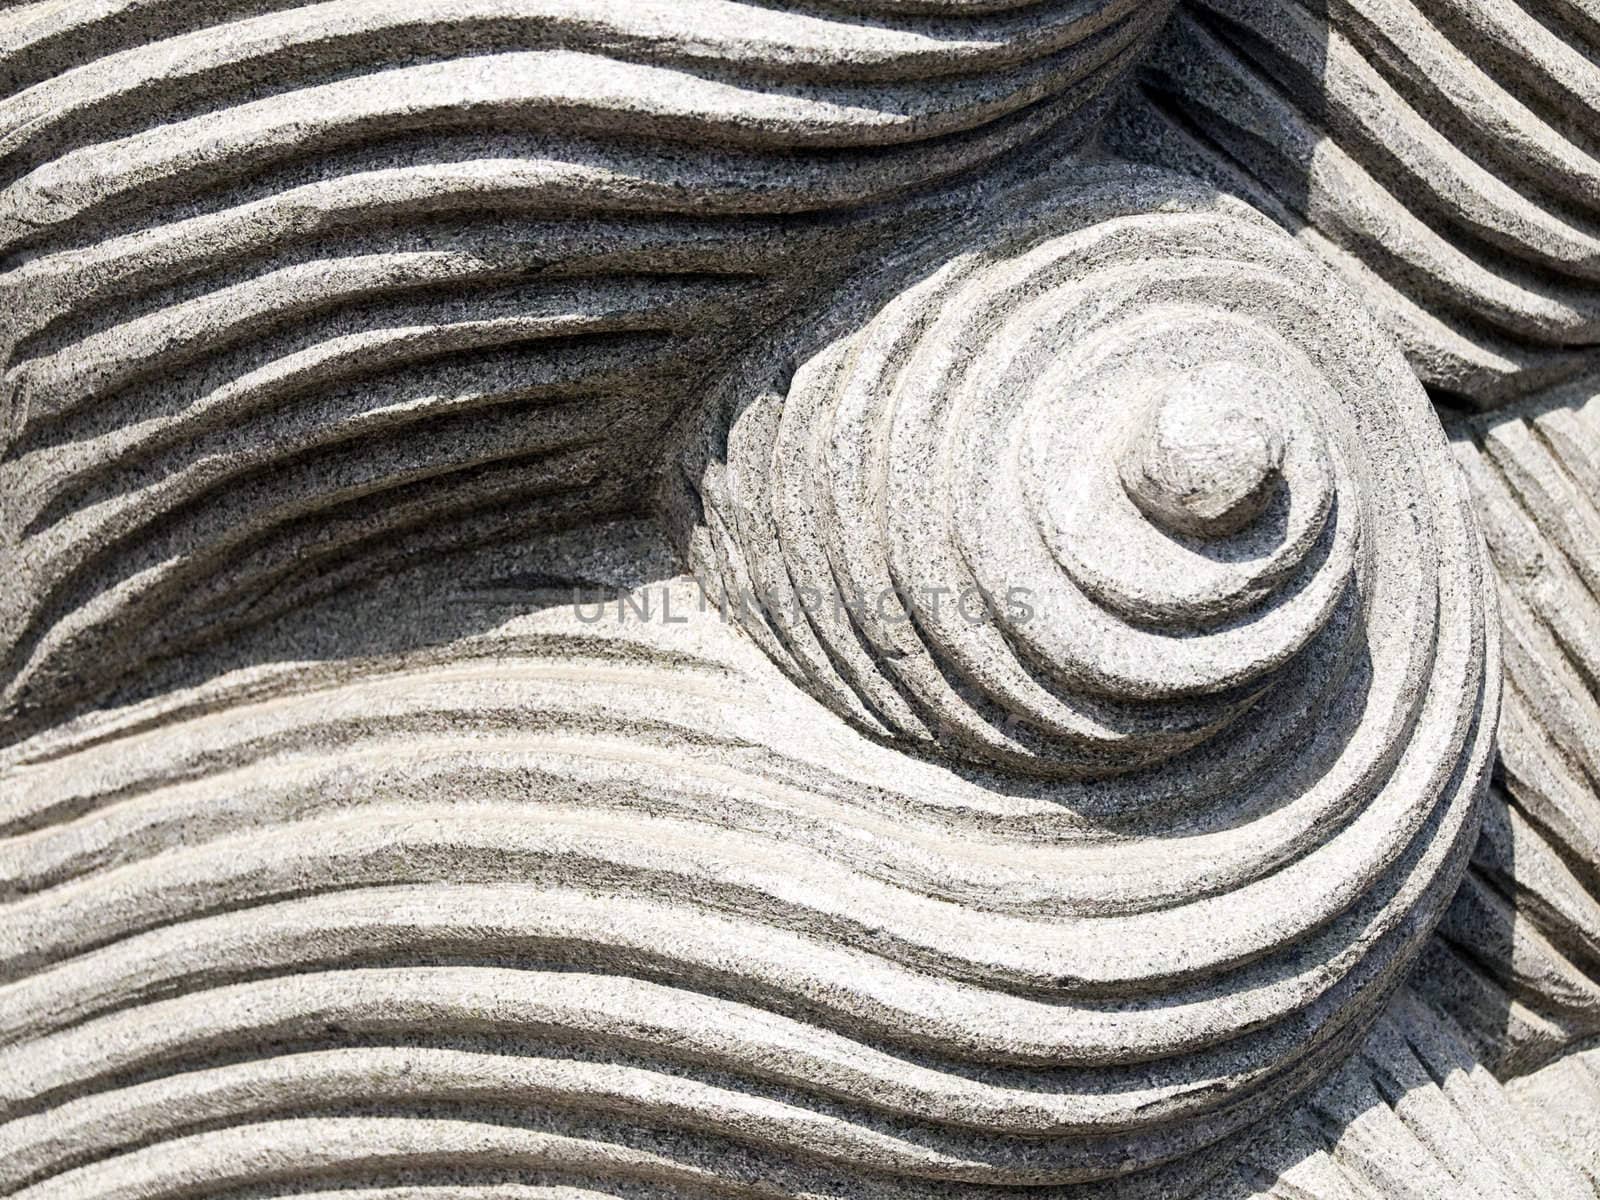 Swirl Carving in Stone by watamyr